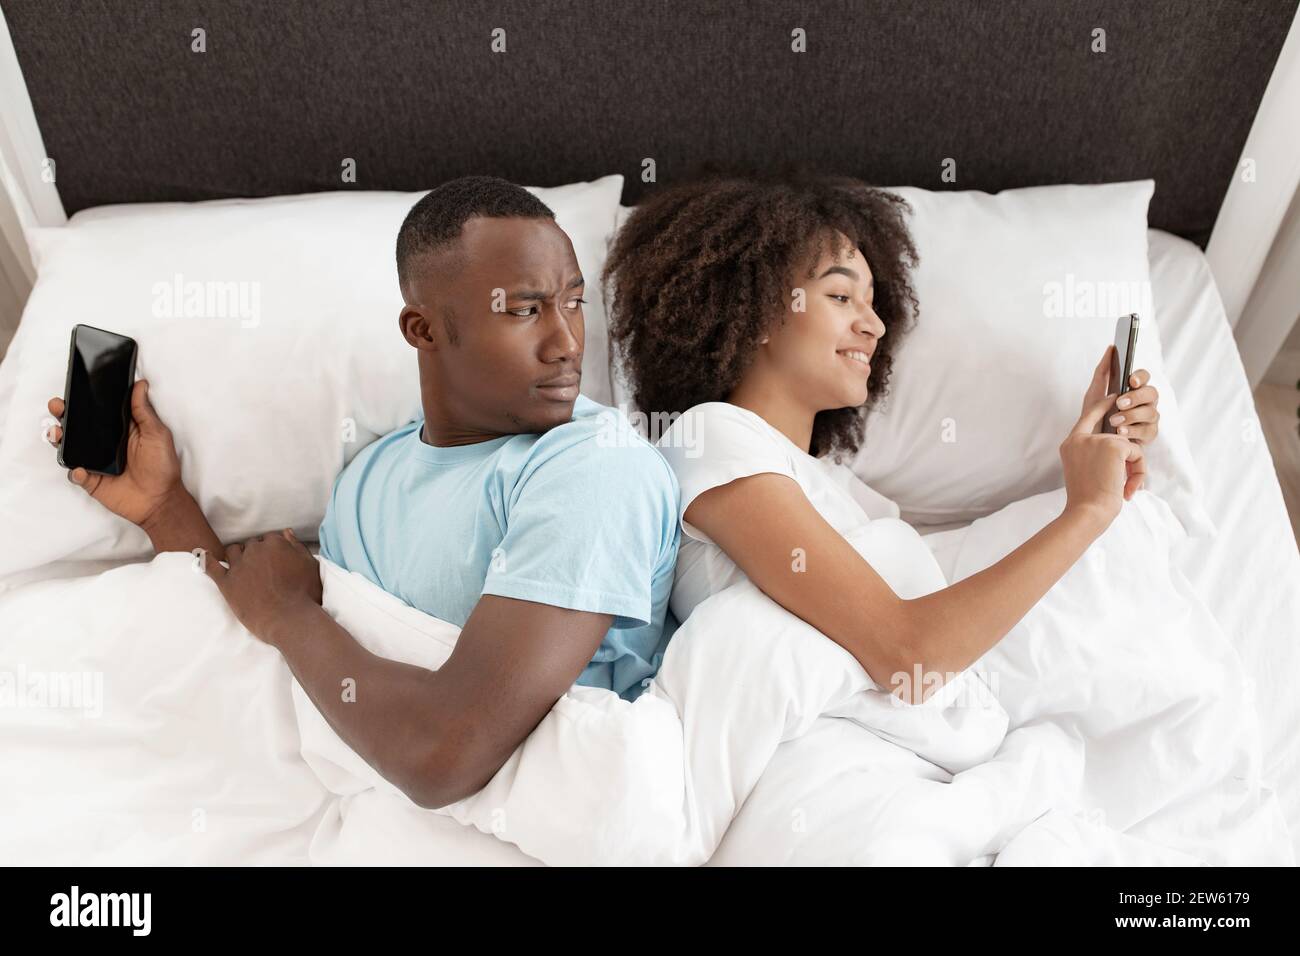 Cheating, infidelity, suspicion, technology and relationship problems Stock Photo